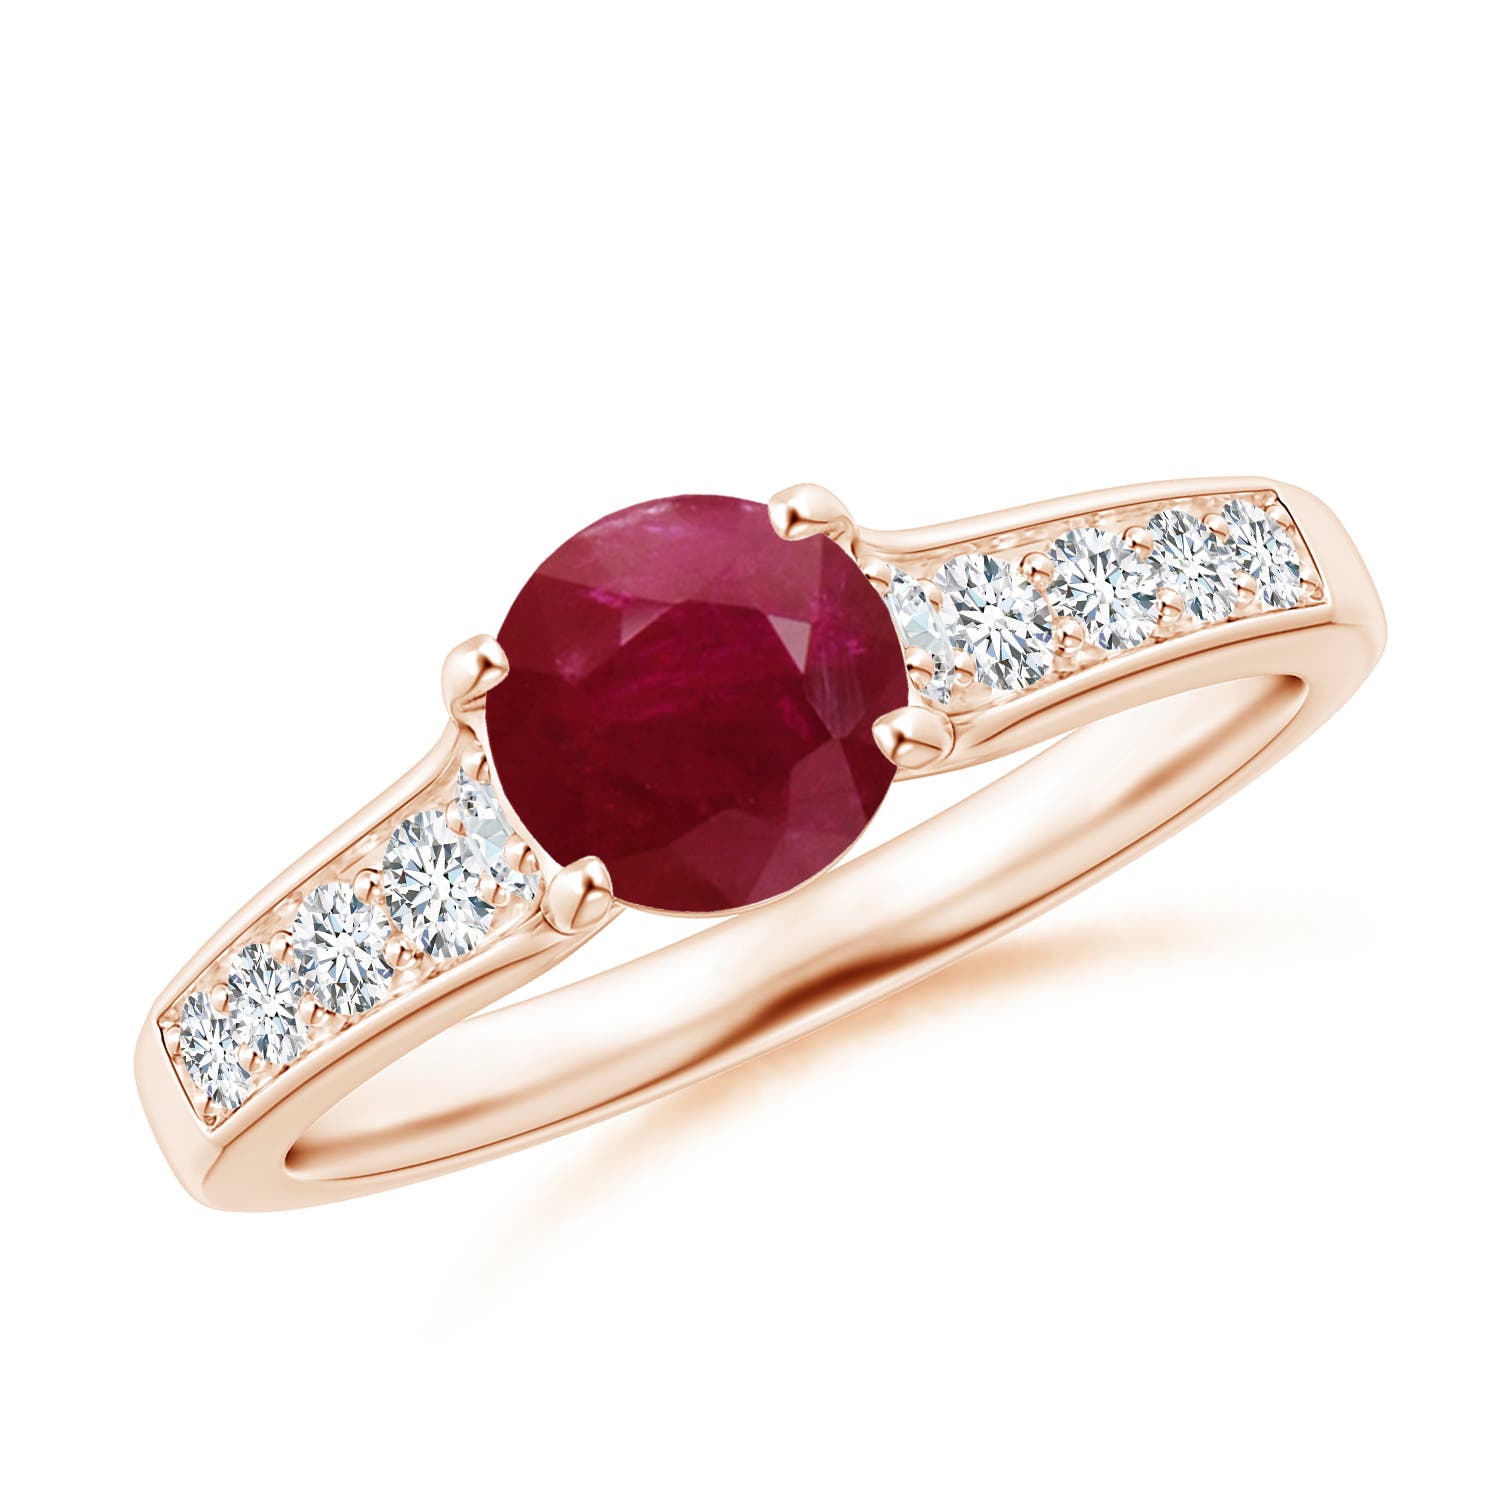 A - Ruby / 1.38 CT / 14 KT Rose Gold